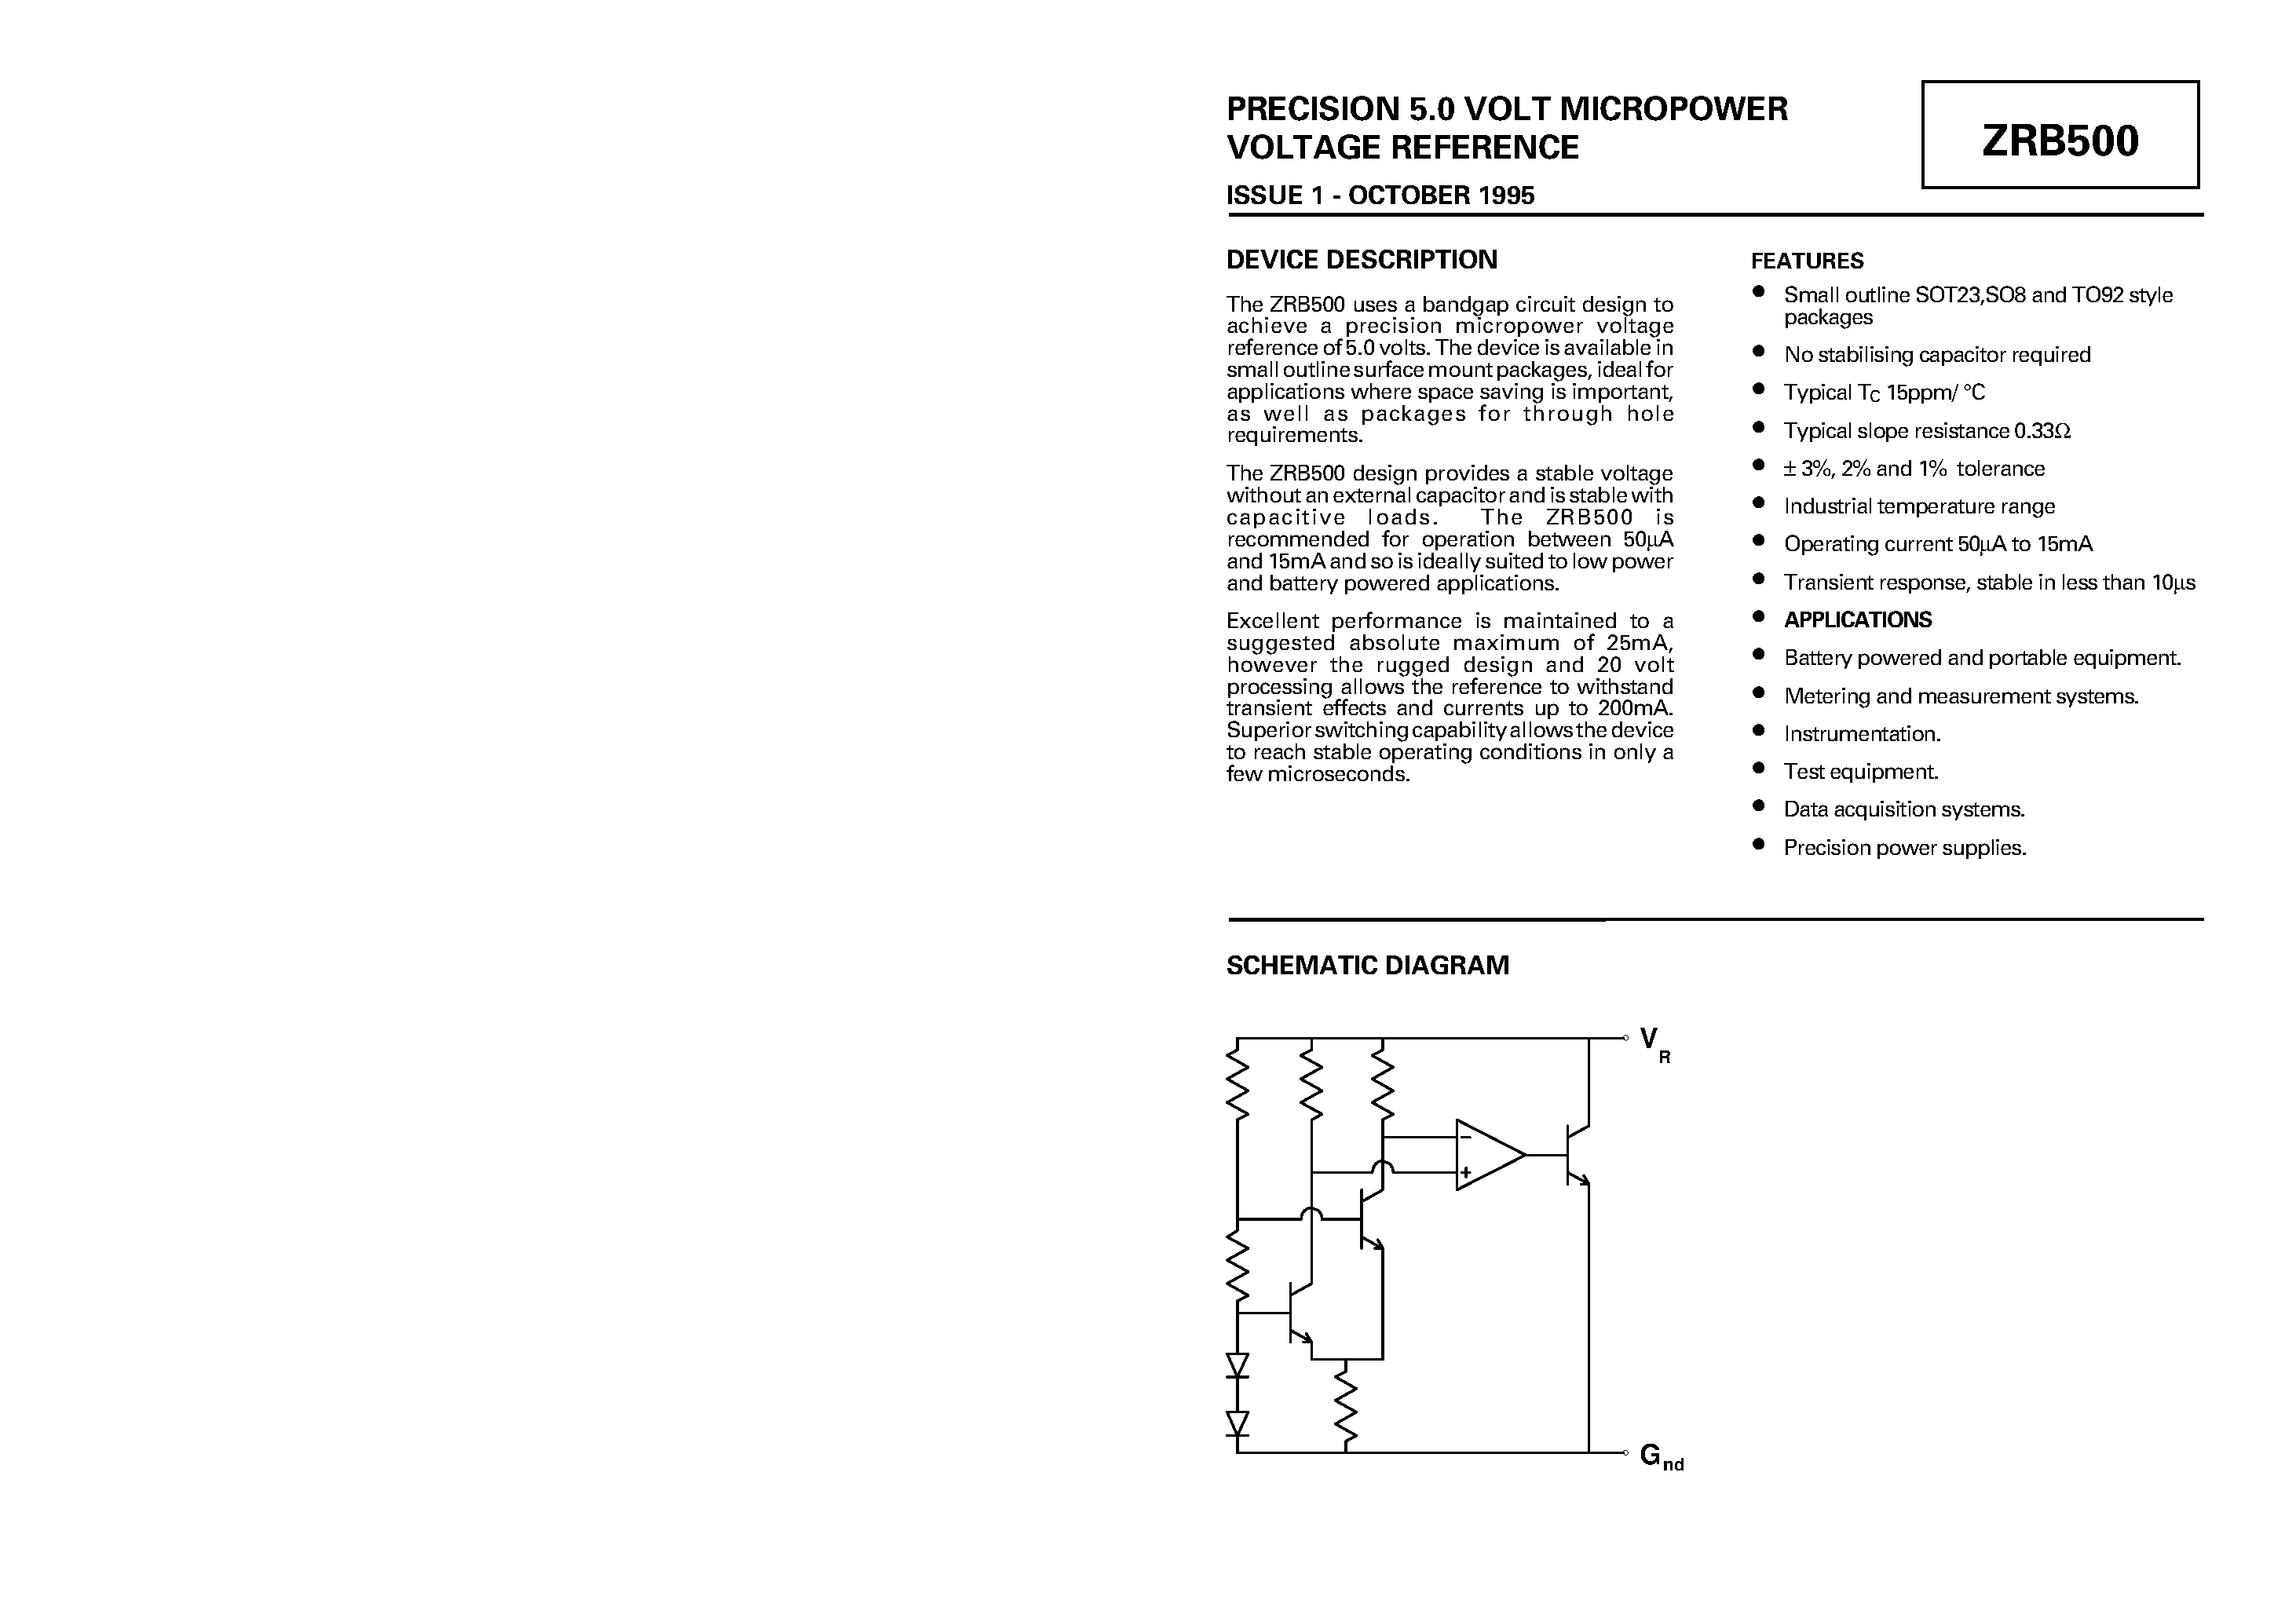 Datasheet ZRB500A02 - PRECISION 5.0 VOLT MICROPOWER VOLTAGE REFERENCE page 1